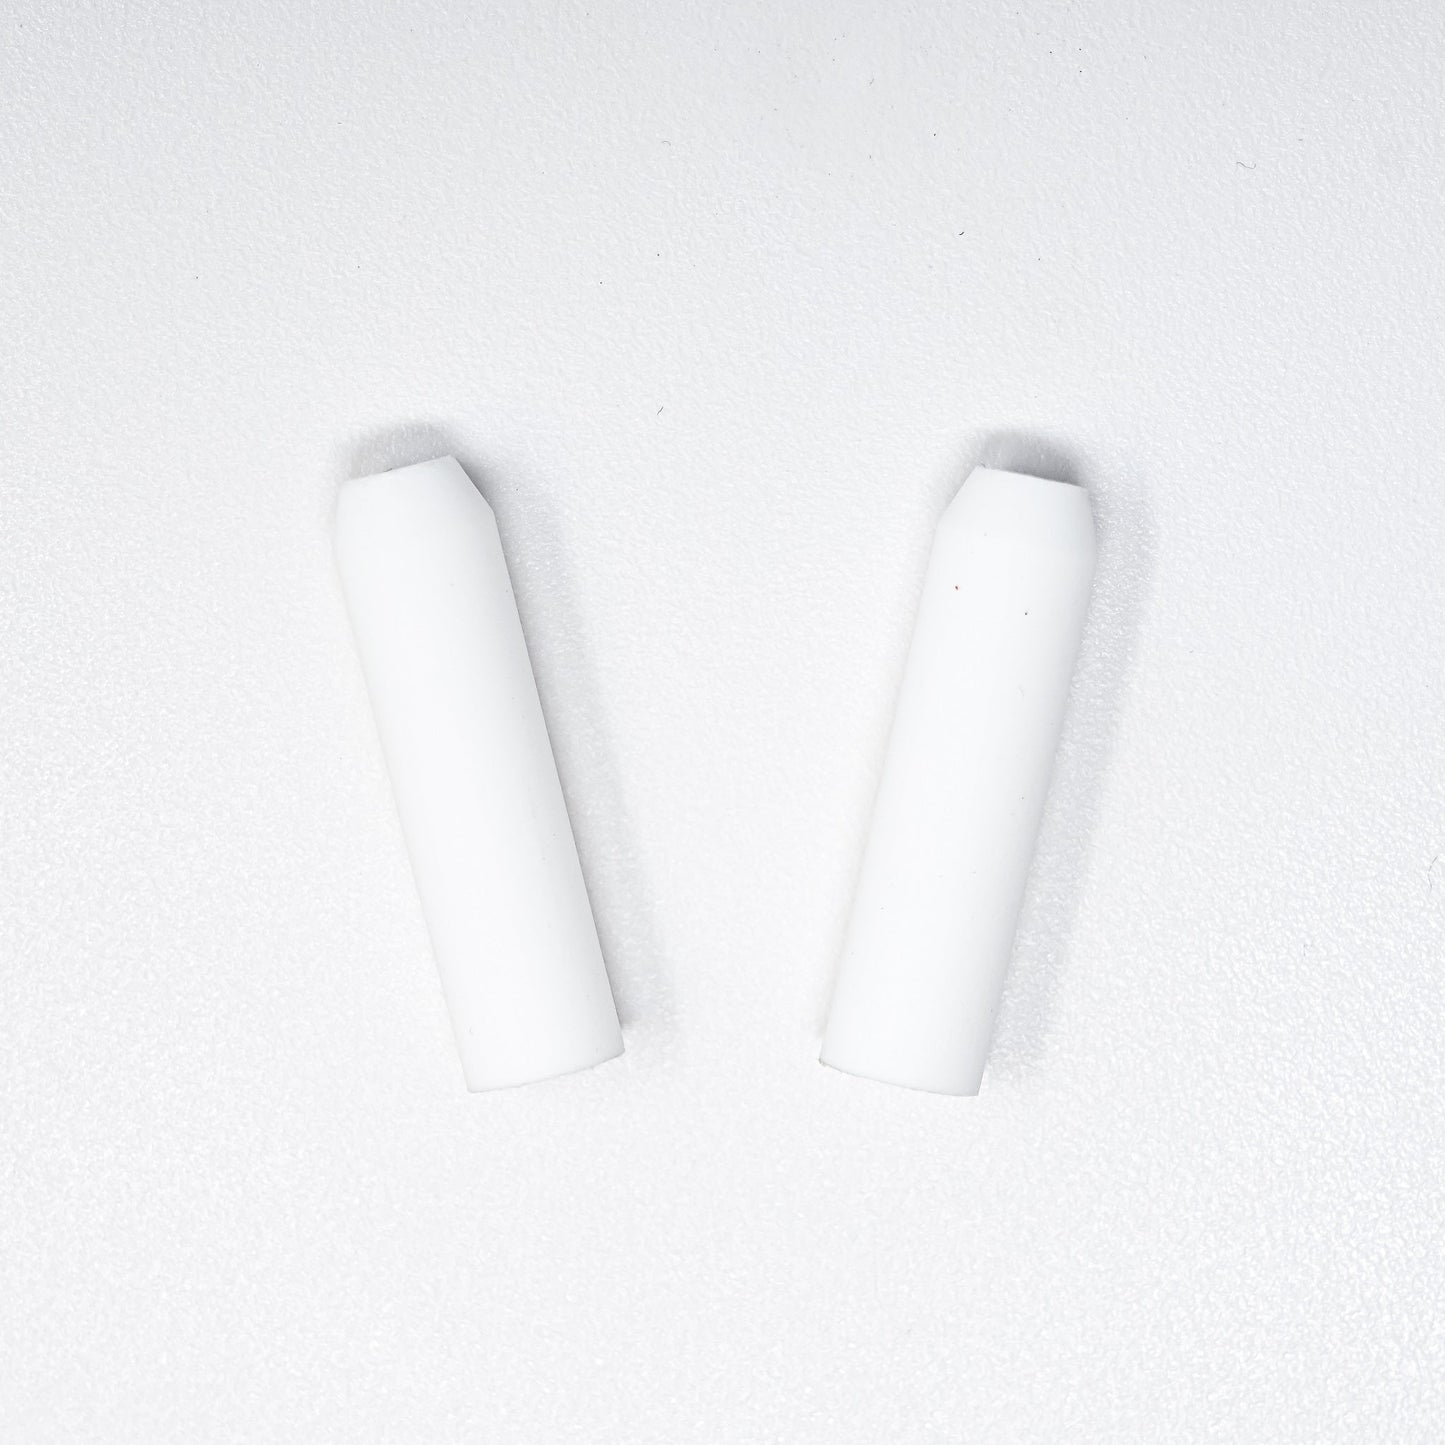 Hollow bullet shaped filters.